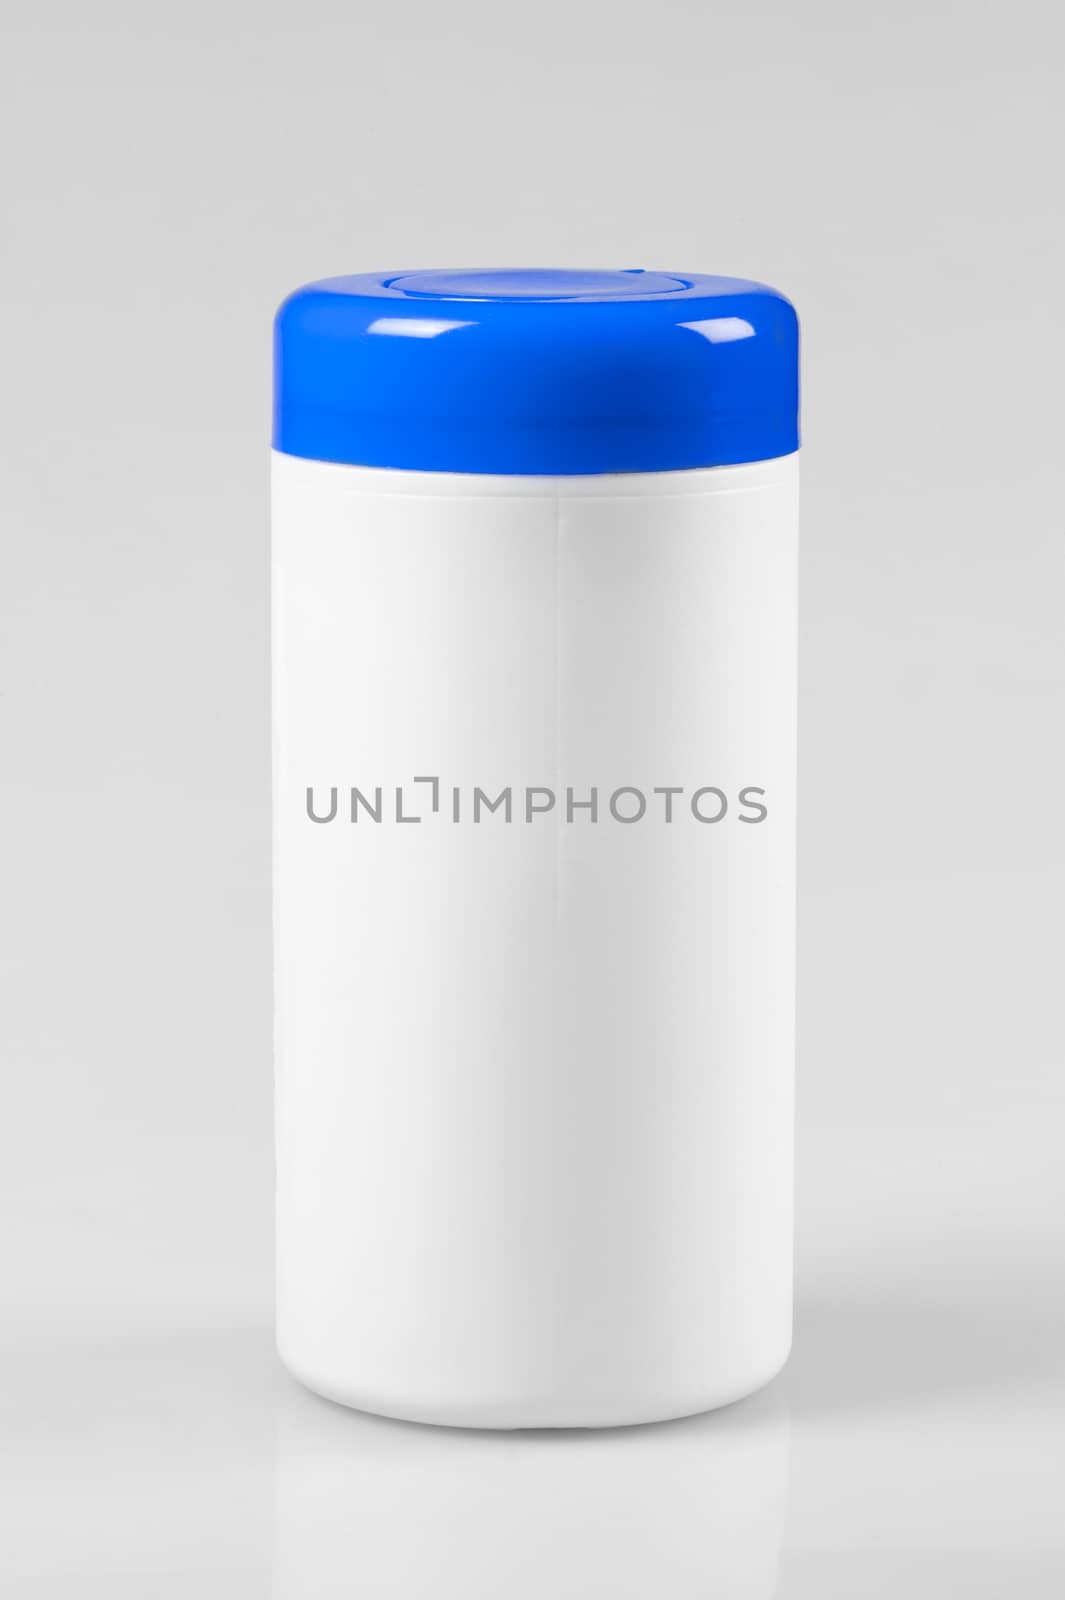 White plastic container with a blue lid by kosmsos111